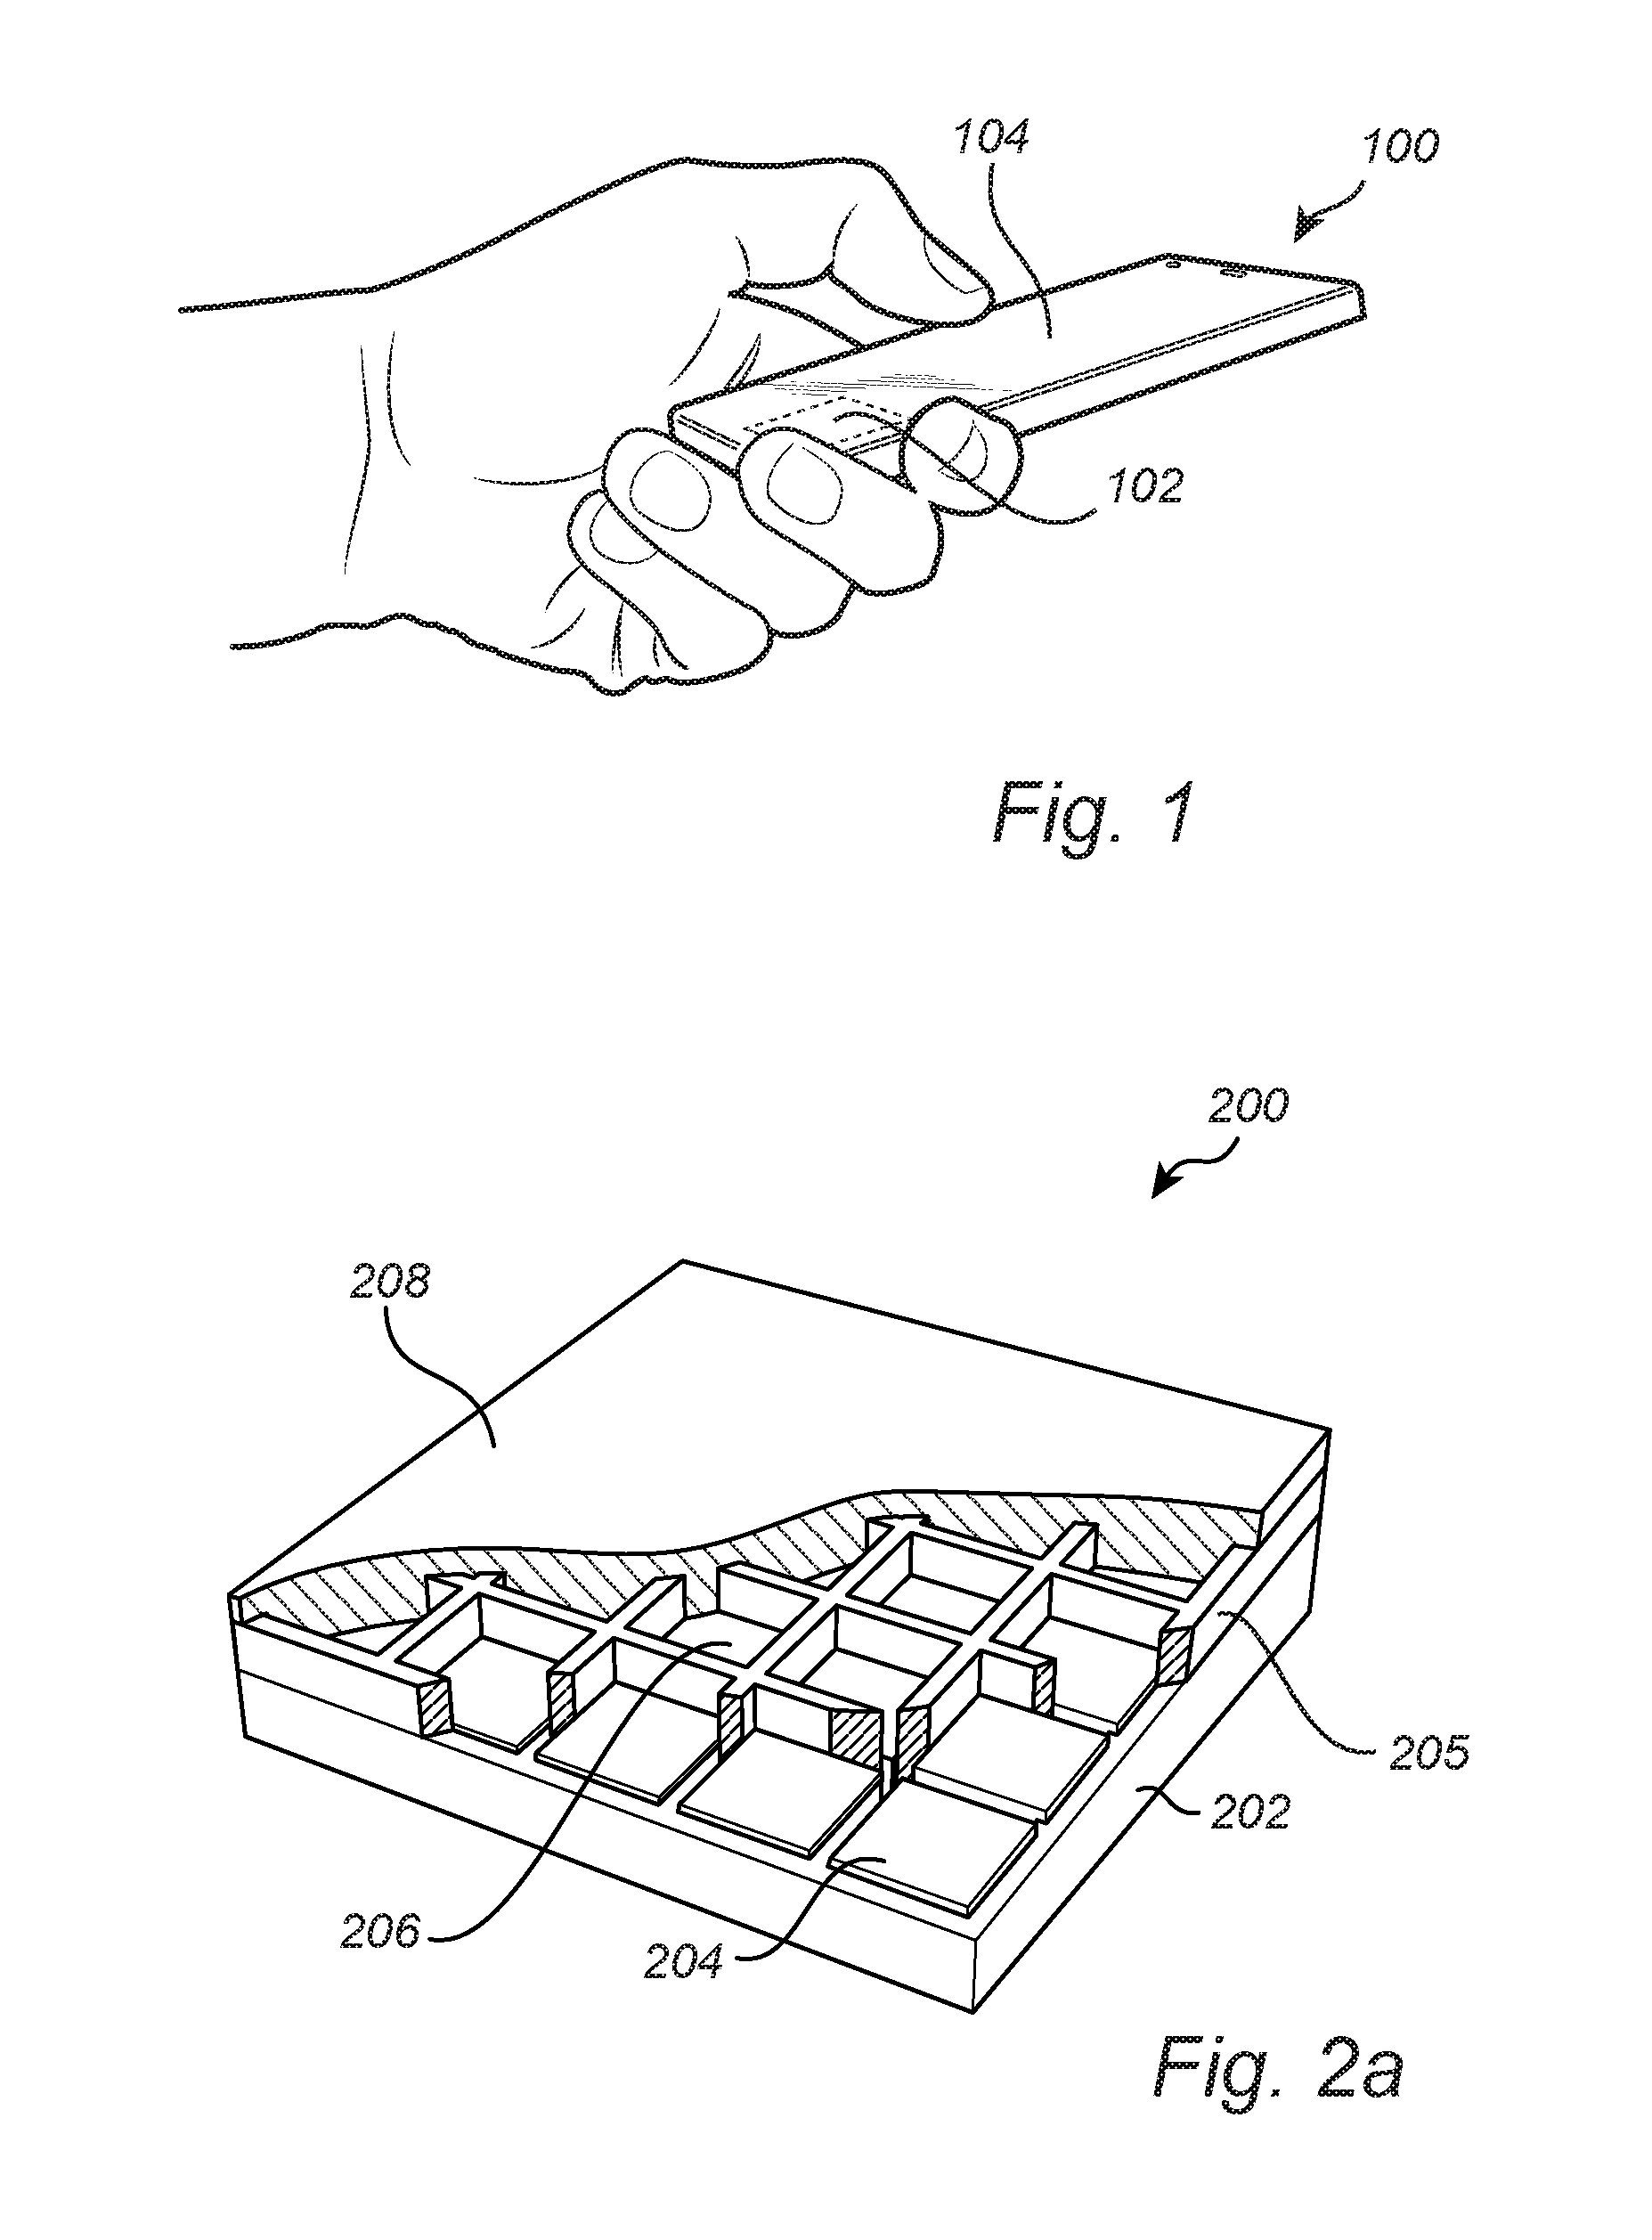 Fingerprint sensing device with heterogeneous coating structure comprising a mold